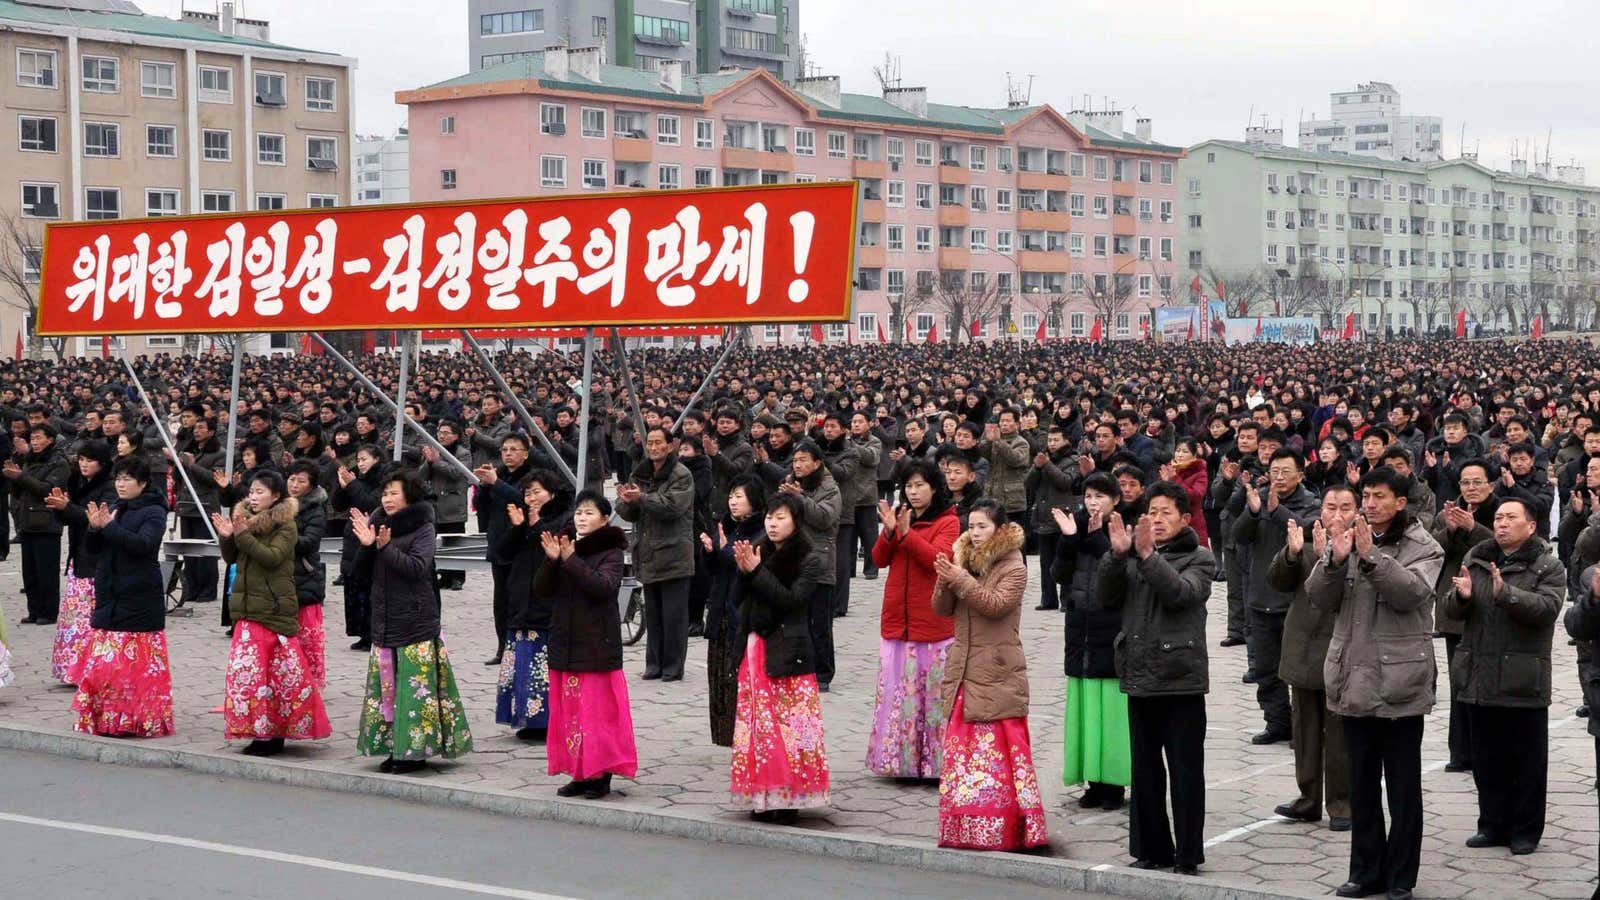 Hailing the completion of North Korea’s nuclear force in December 2017.